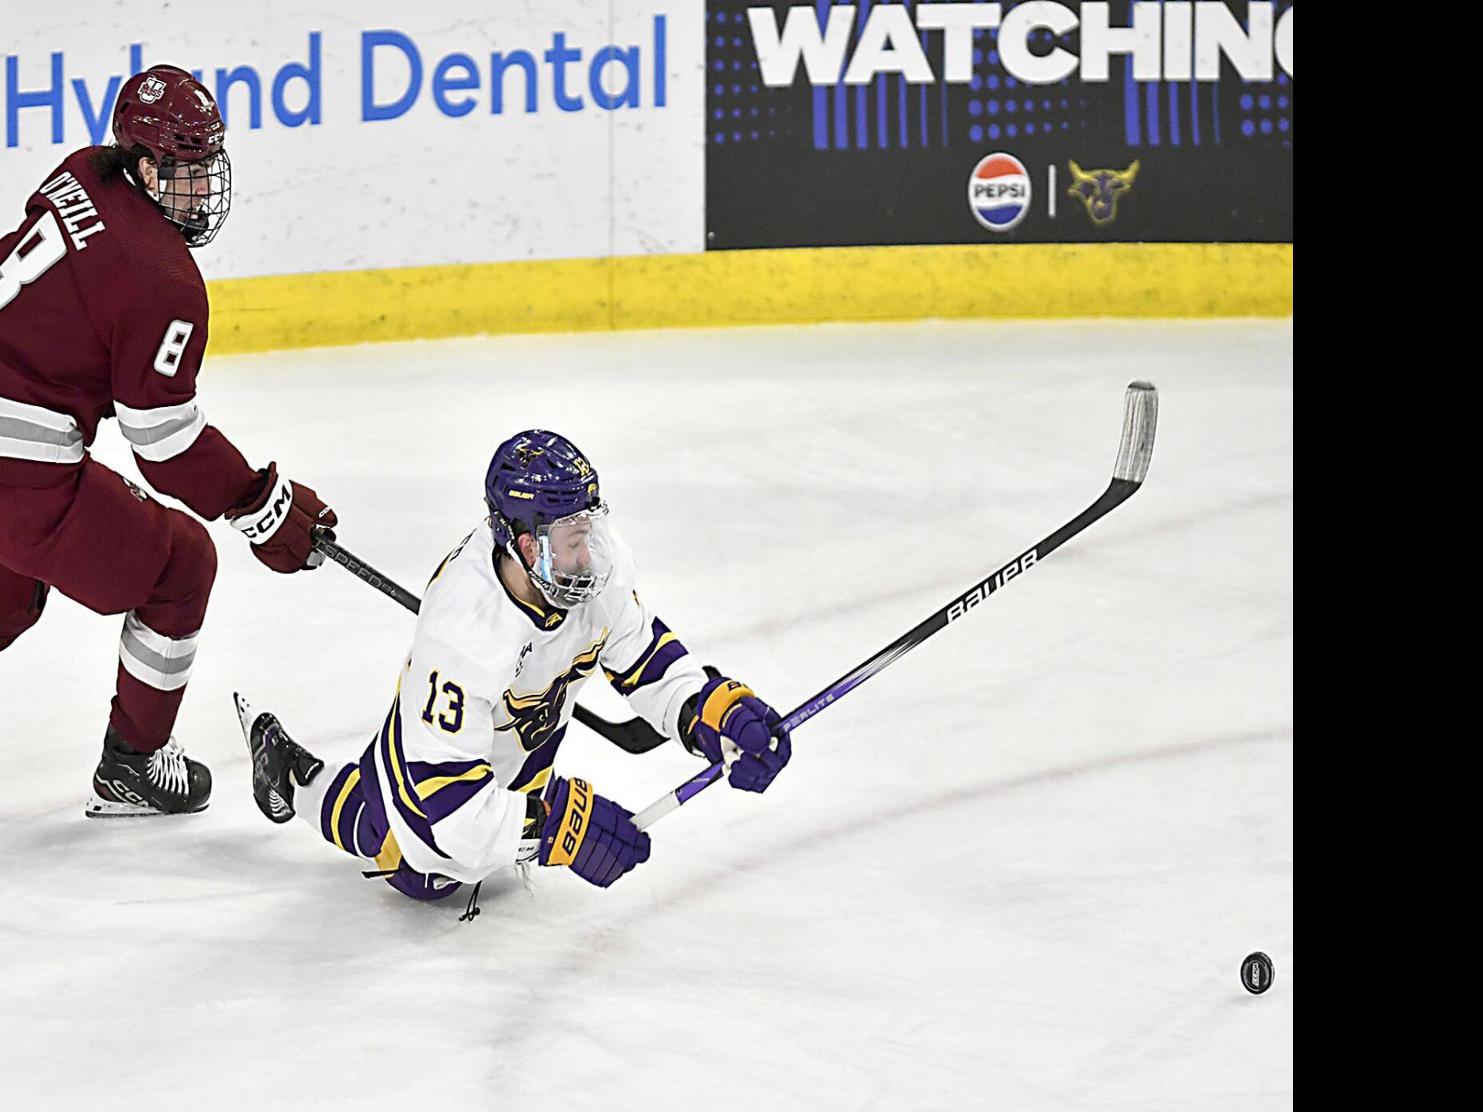 Men's college ice hockey: No. 5 Minnesota State completes road sweep at No.  1 UMass with 6-3 win Sunday